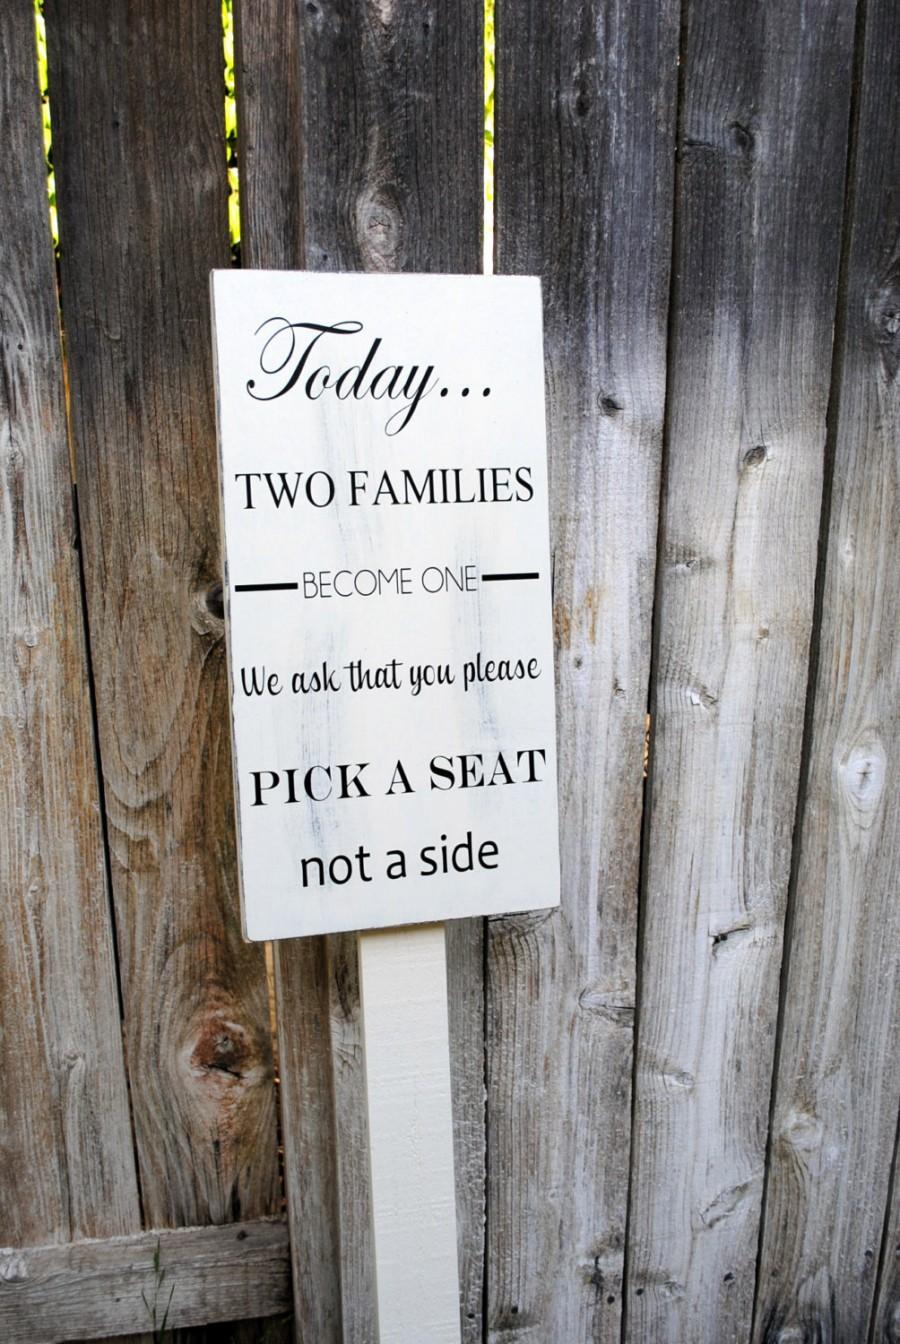 Hochzeit - 10"x18 shabby chic Today, two families become one, pick a seat not a side wood sign, seating sign ON STAKE